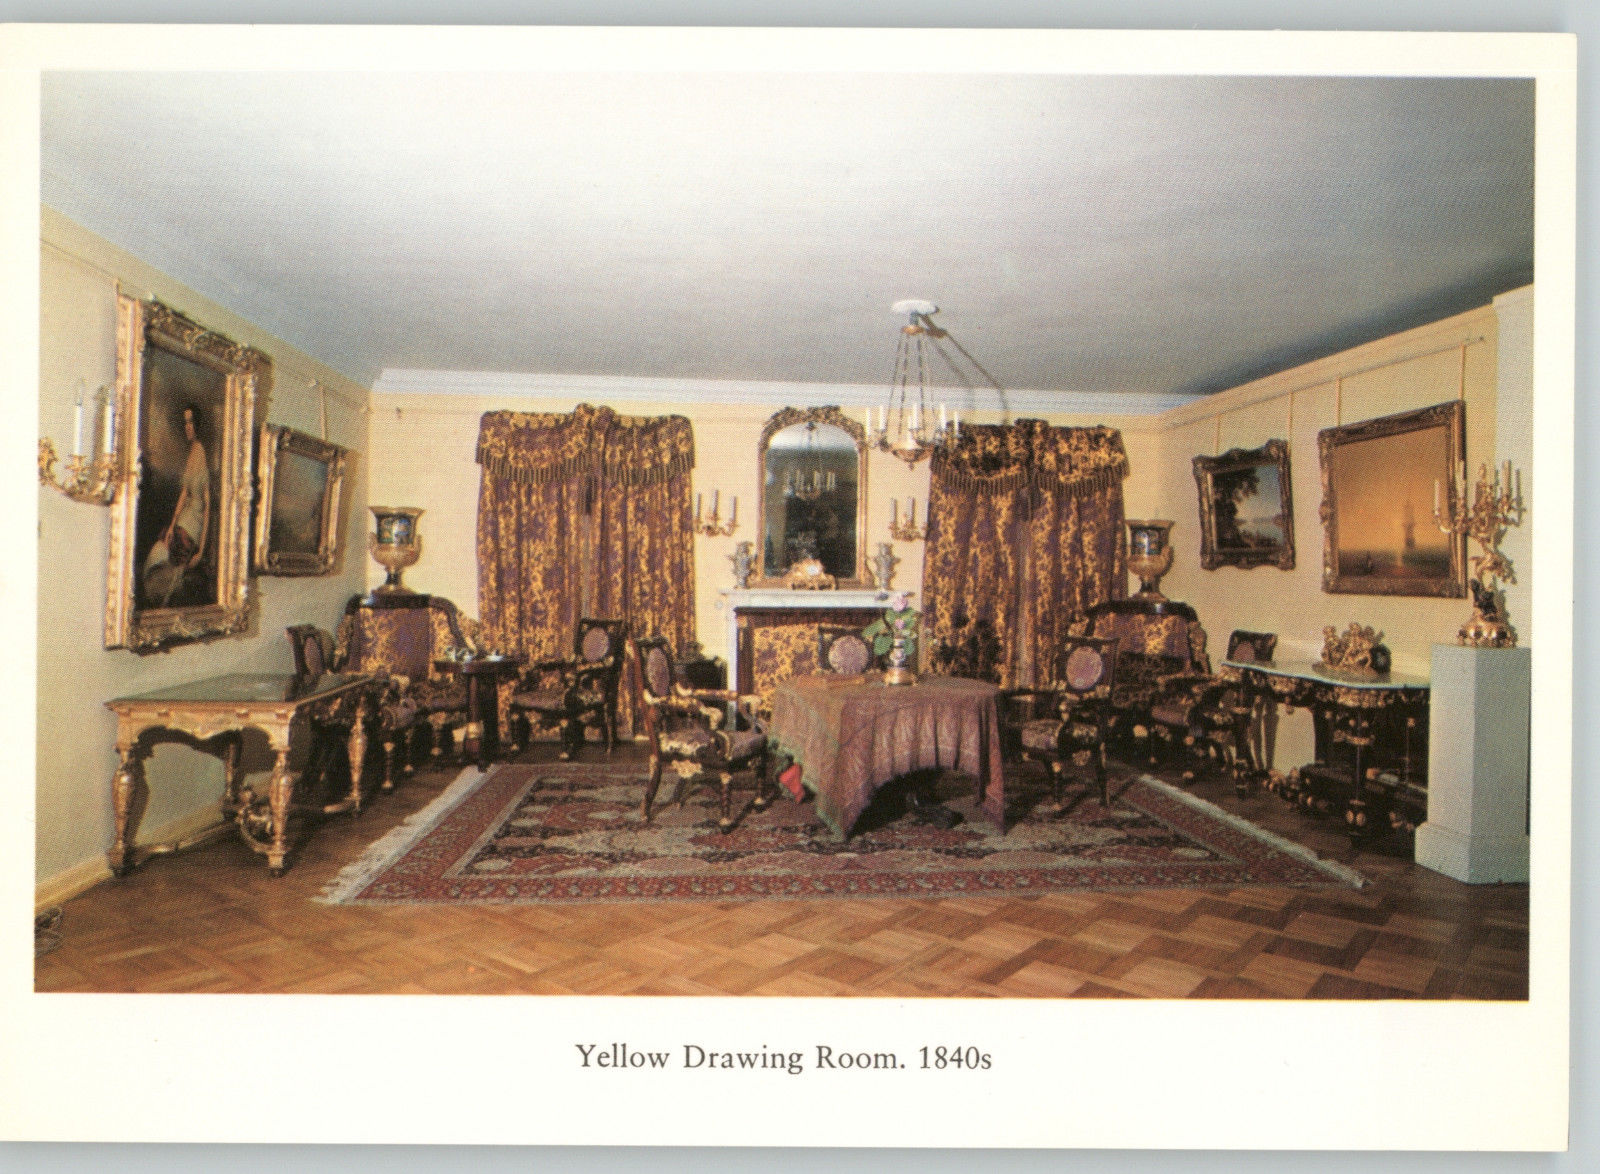 Yellow Drawing Room Furniture Imperial Russia Interior